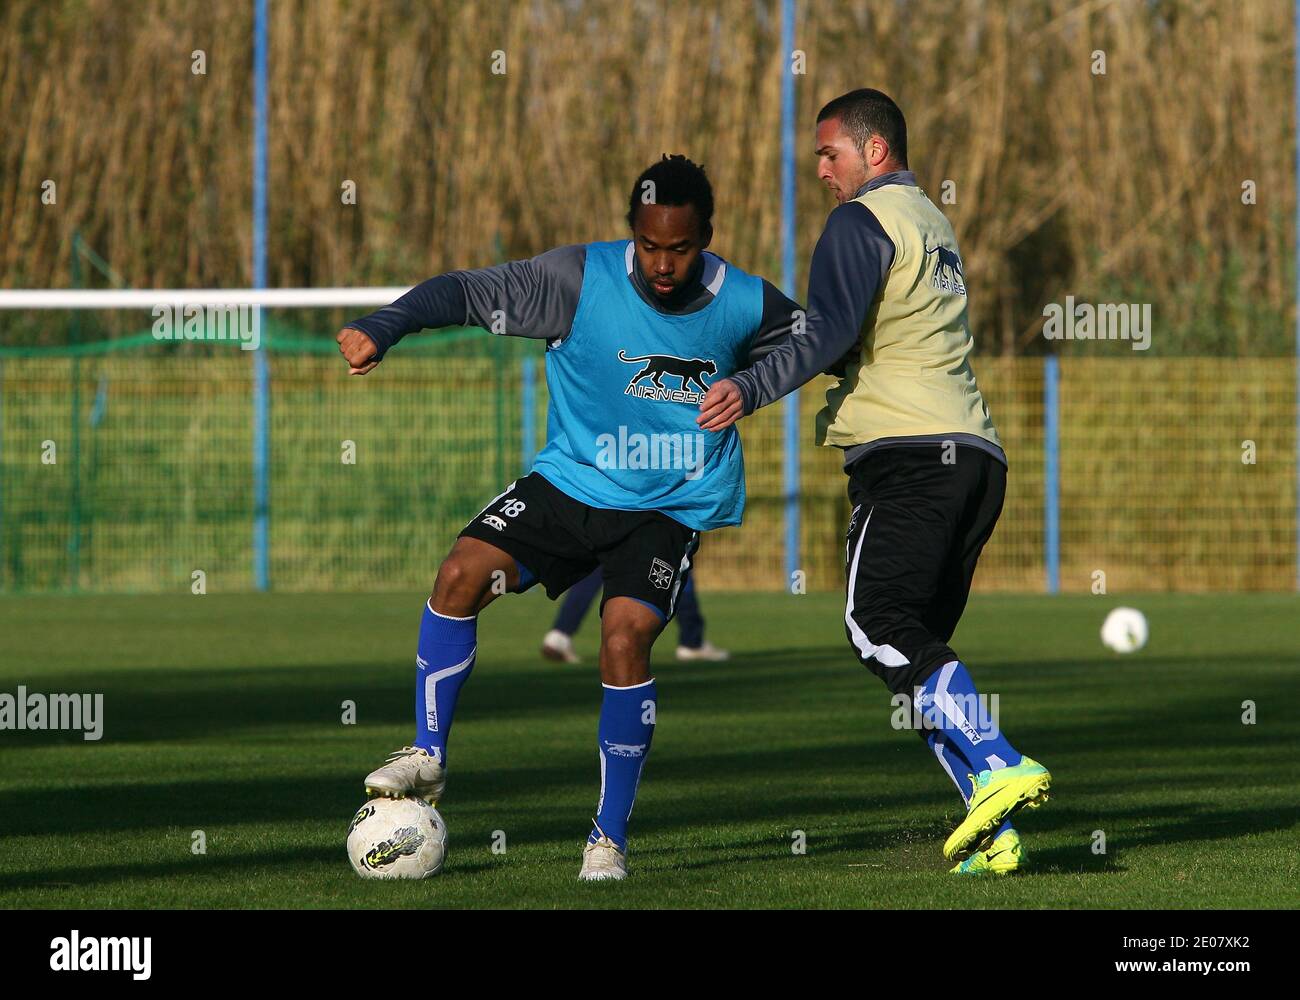 Auxerre's Roy Contout and Ben Sahar during the training camp in Canet en Roussillon at the Saint-Michel Stadium in Canet en Roussillon, near Perpignan, France on January 6, 2012 prior to French Cup soccer game Chambly. Photo by Michel Clementz/ABACAPRESS.COM Stock Photo